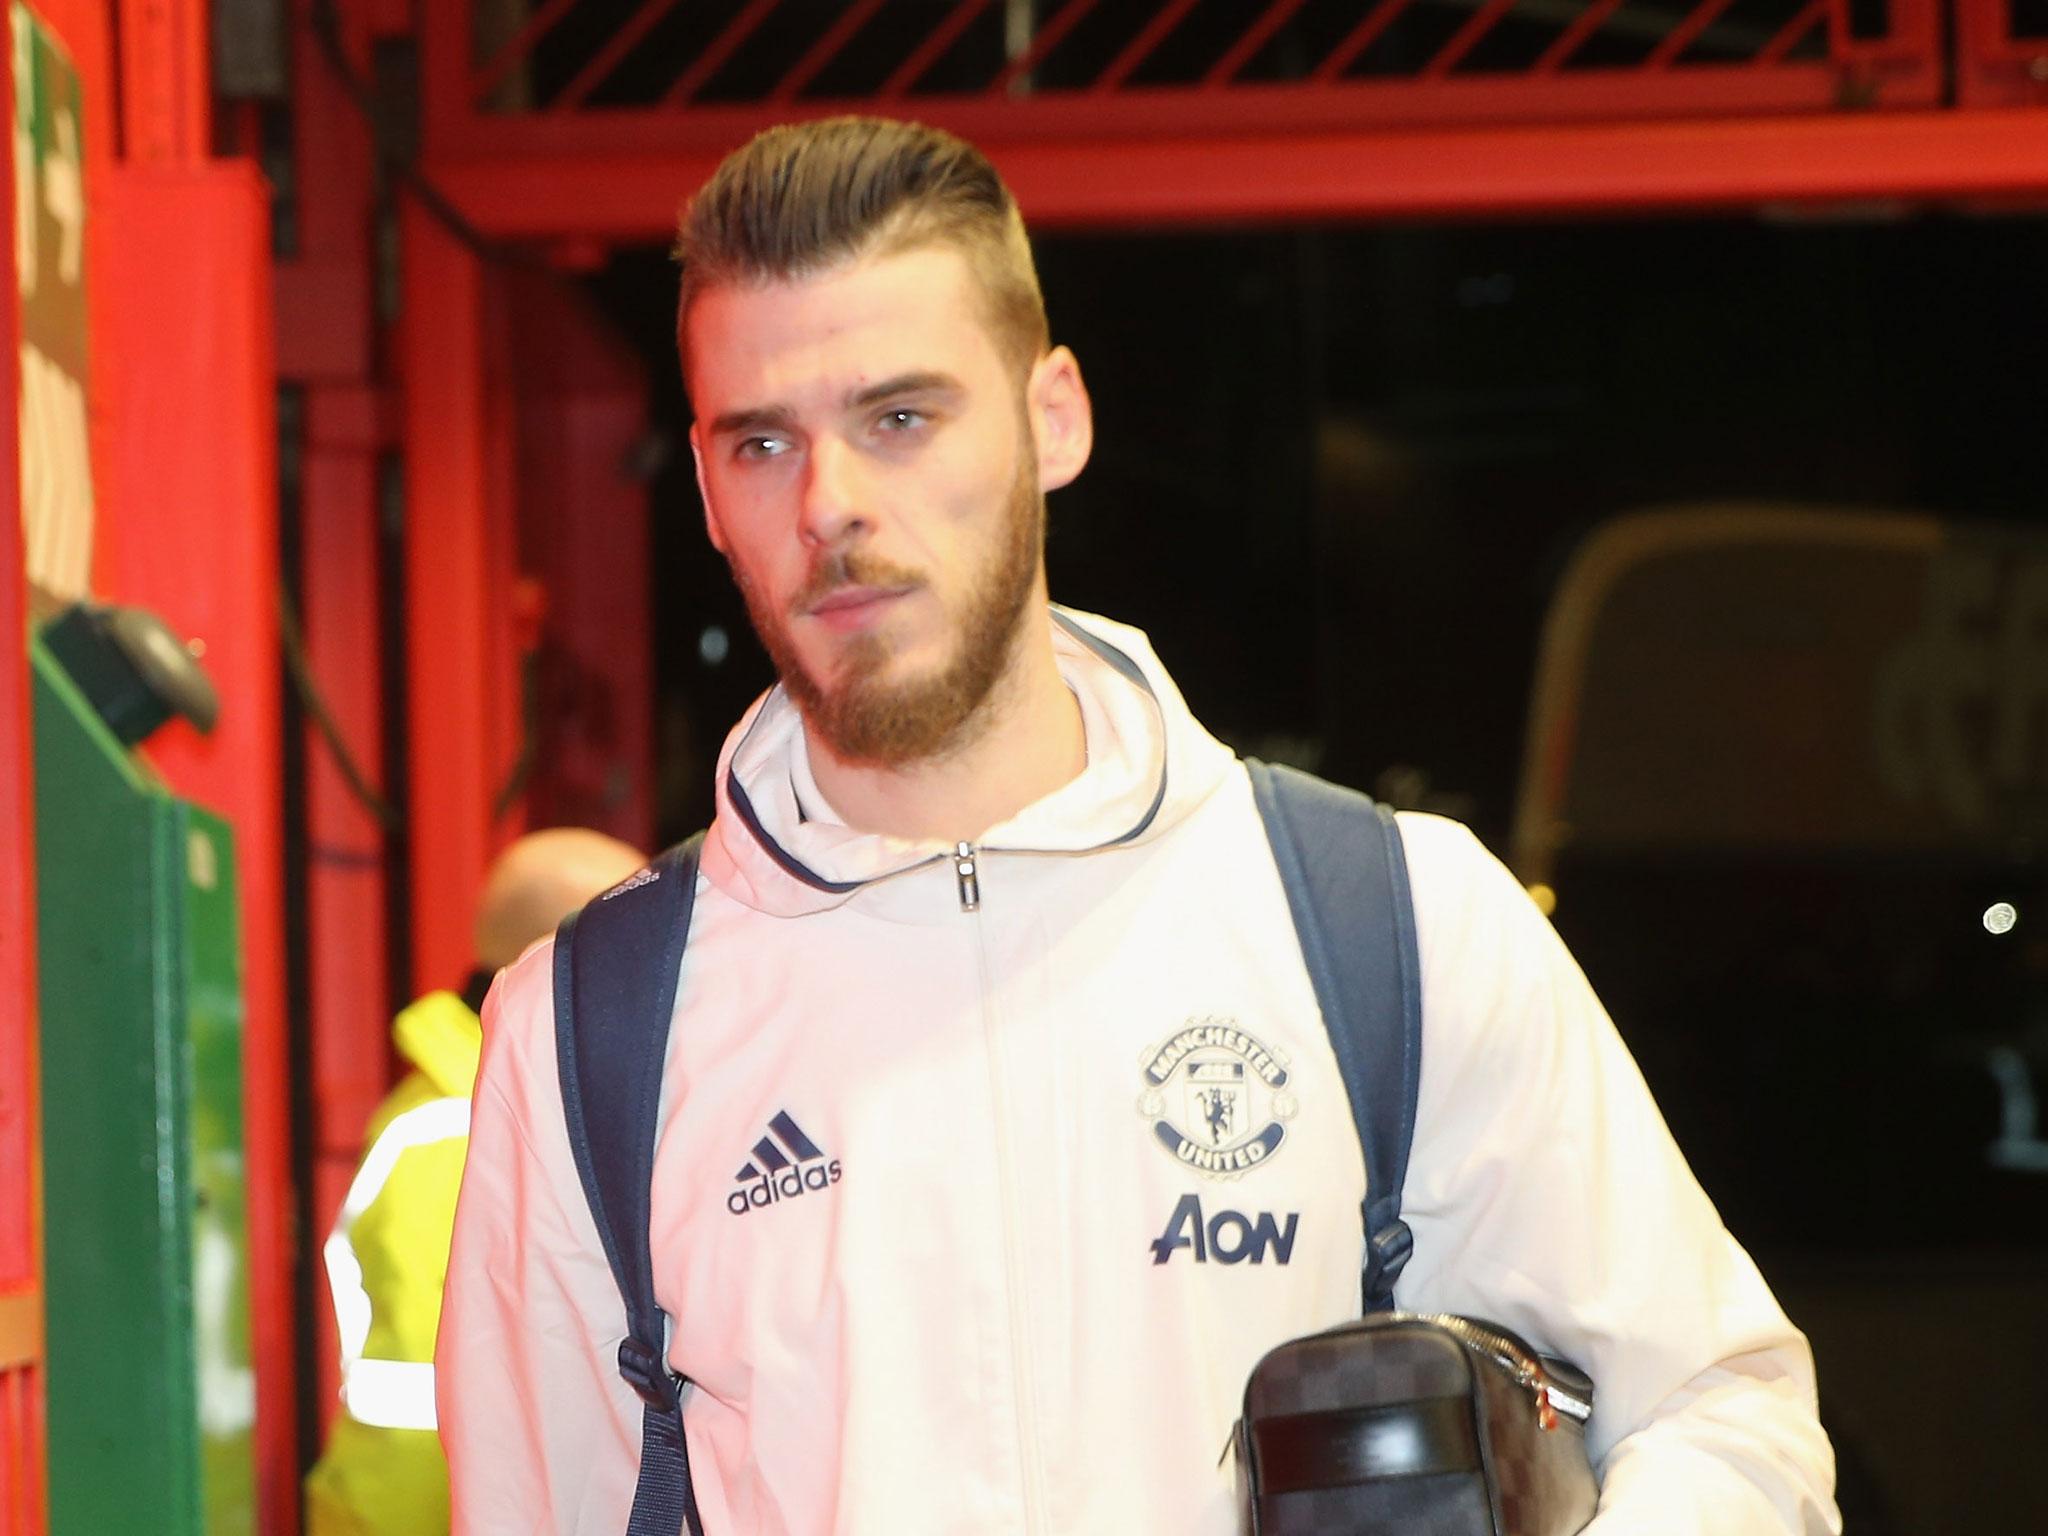 David de Gea looks increasingly likely to leave Manchester United this summer